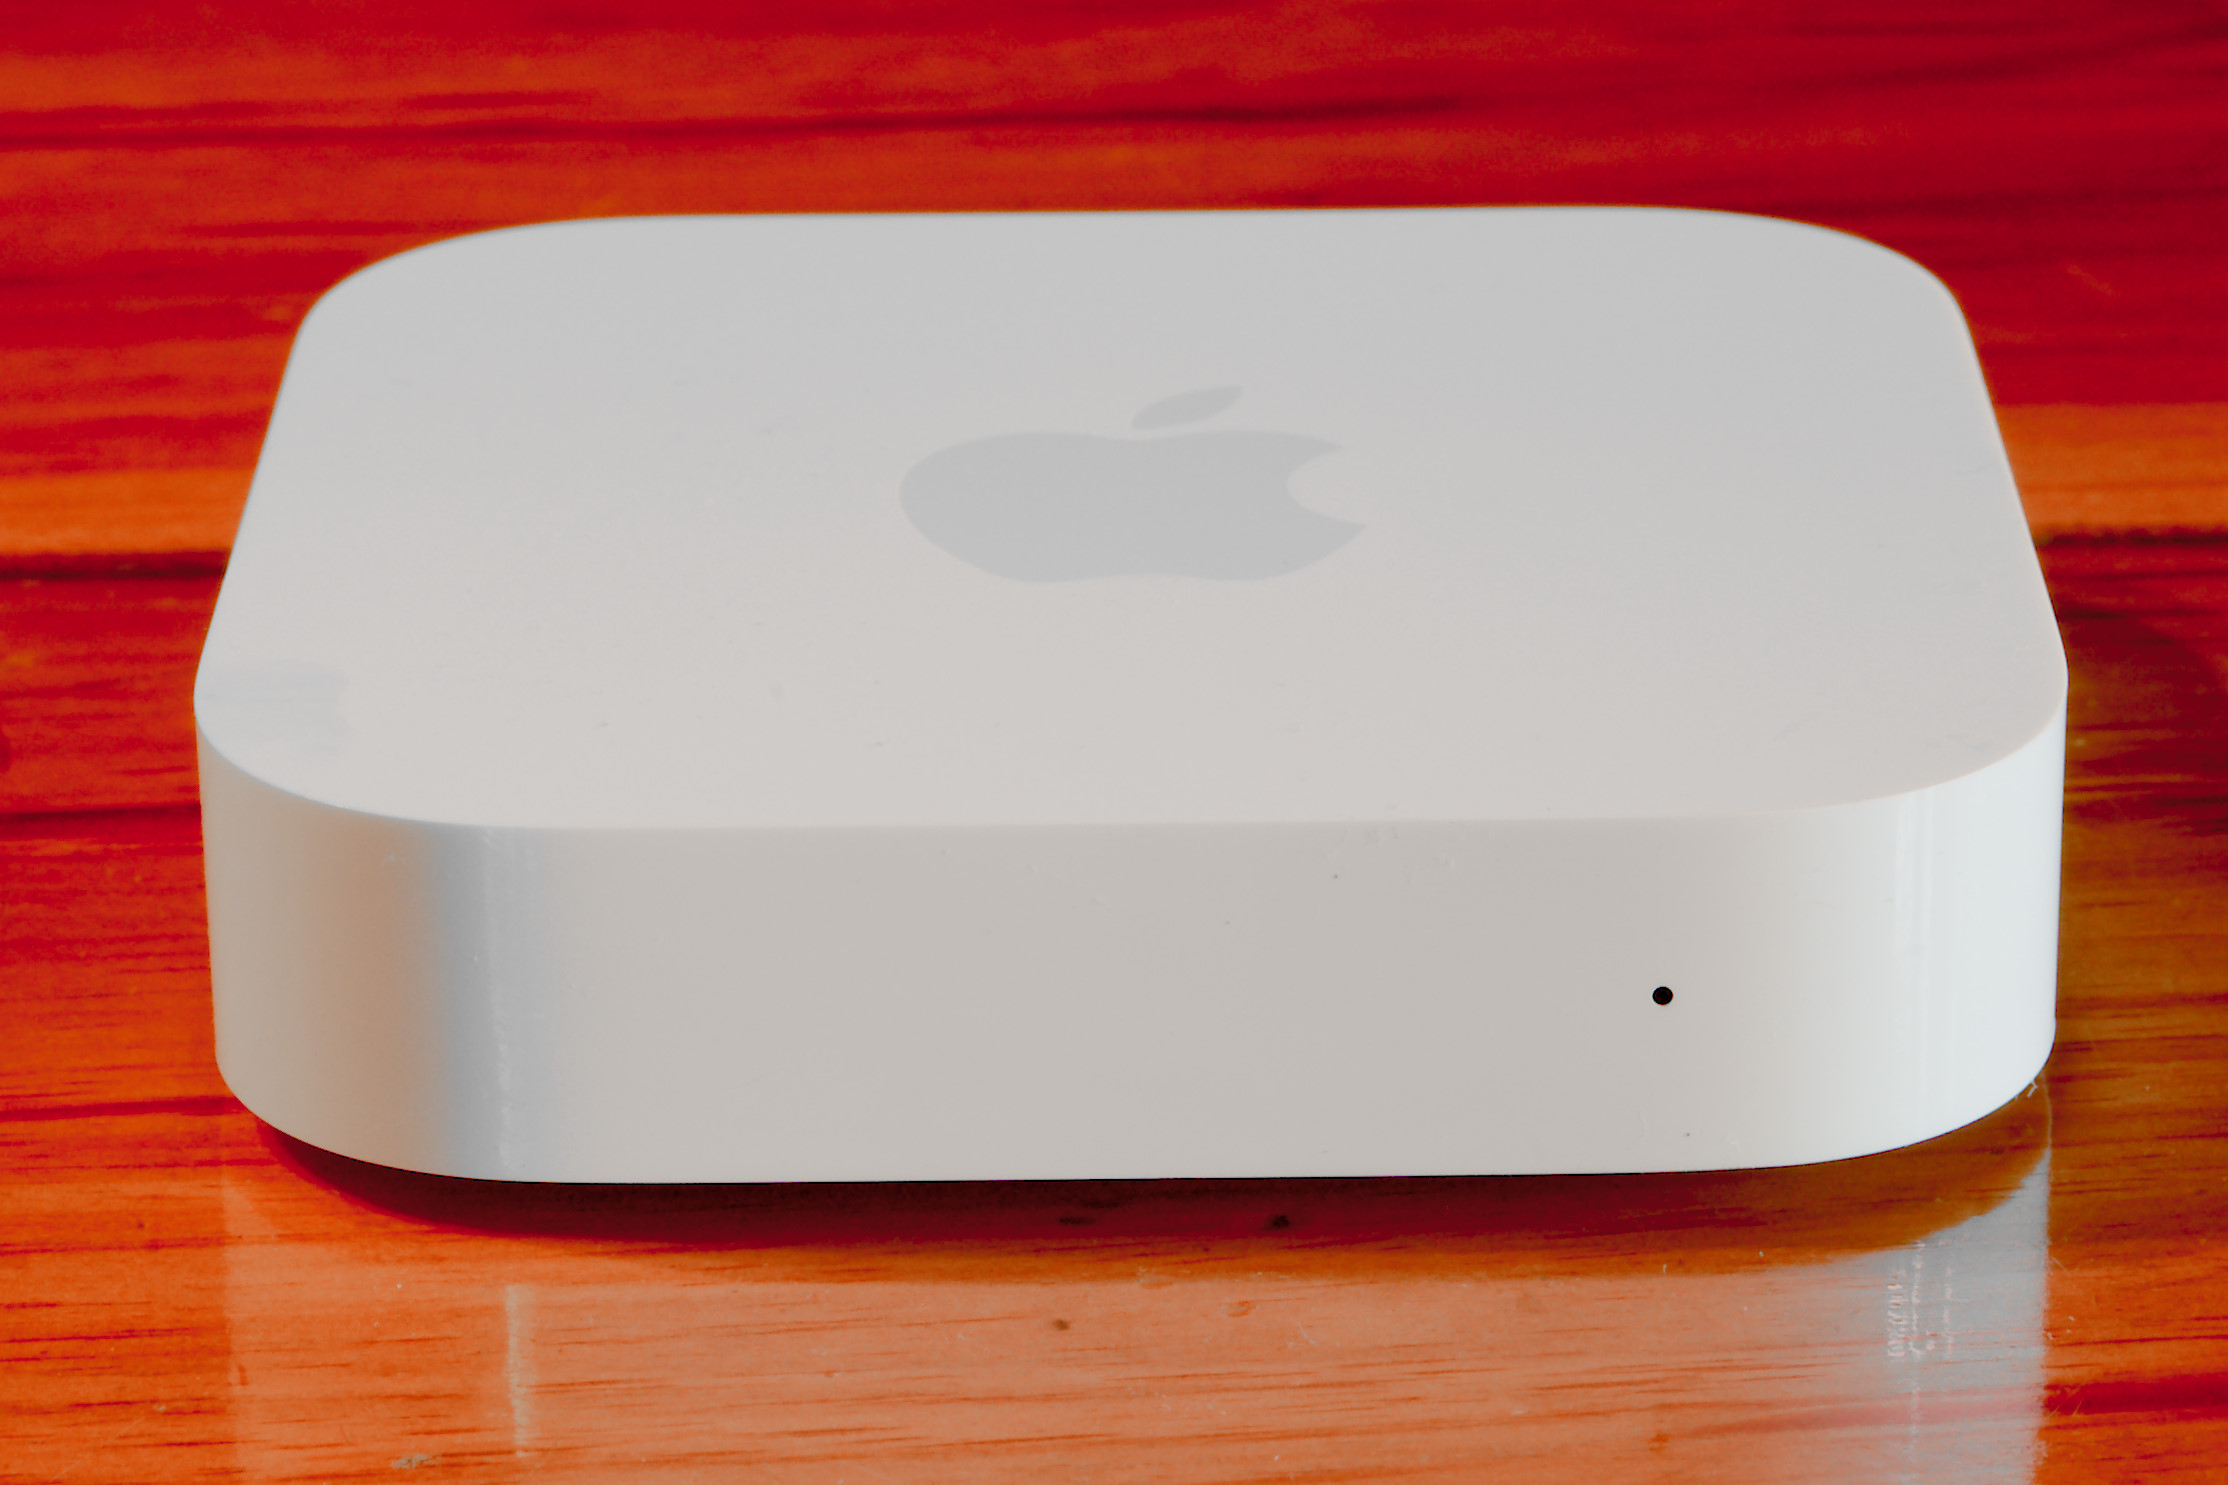 Mysterious Apple device appears in FCC filings — but what is it?